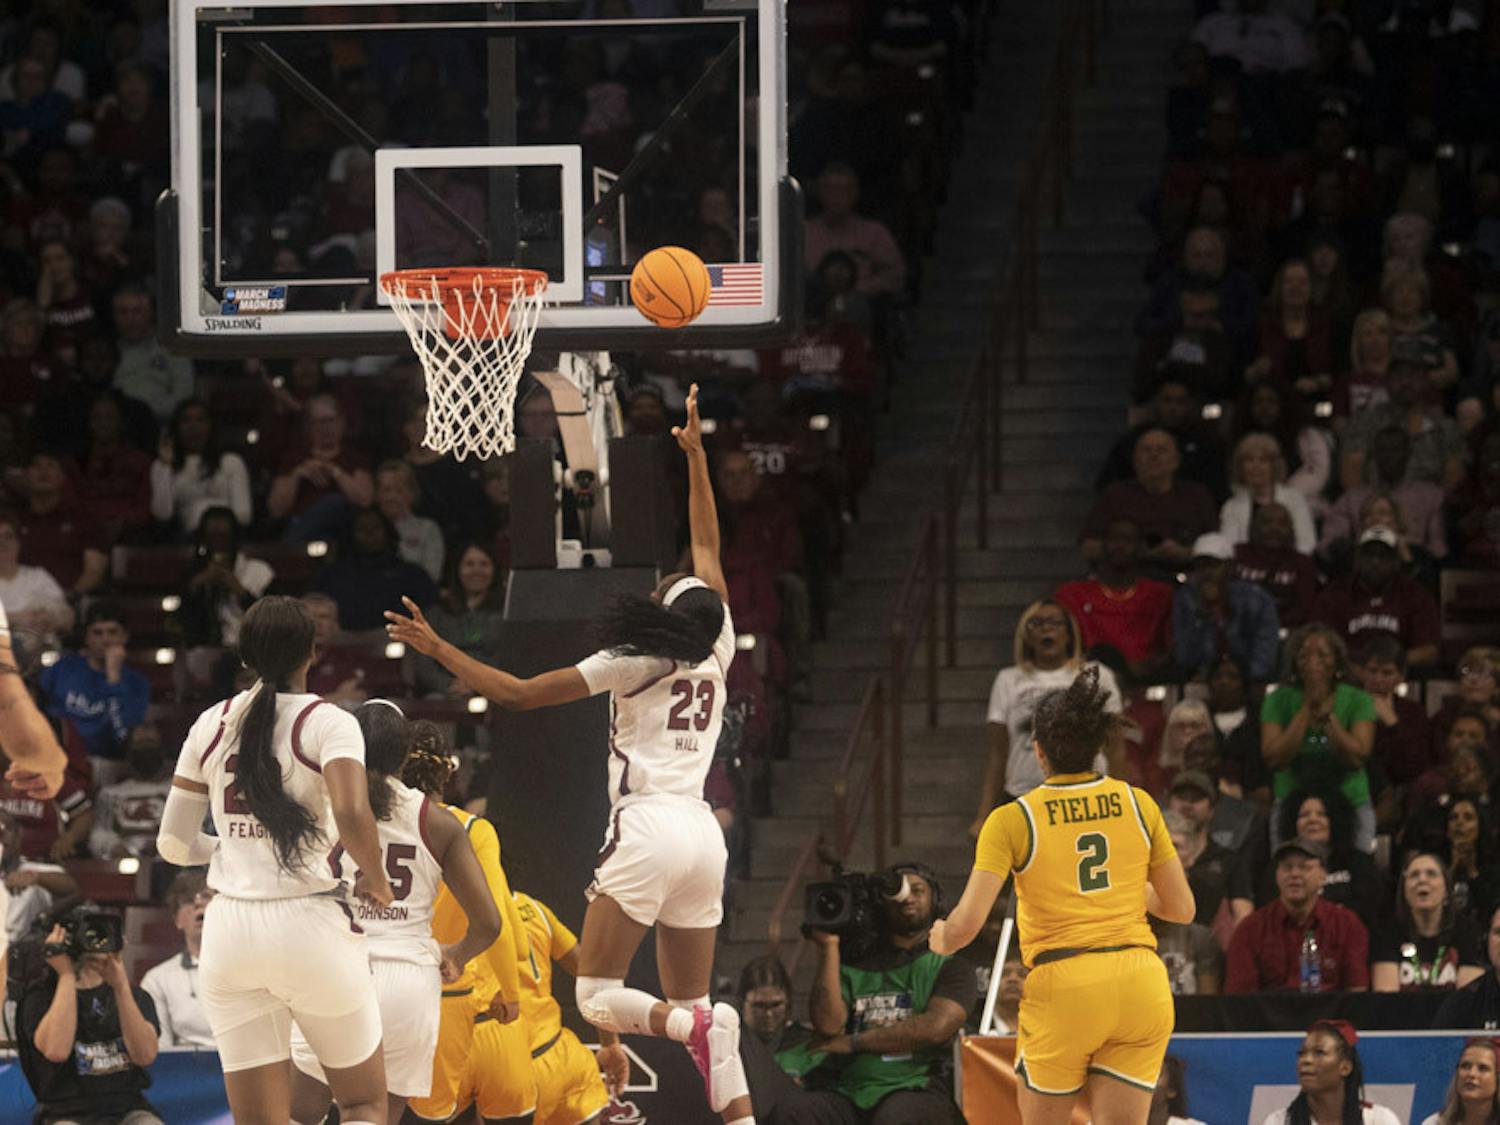 Sophomore guard Bree Hall finishes a layup in the third quarter to putting South Carolina up 47-26 on Norfolk State during the first round of the NCAA tournament on March 17, 2023. Hall finished the game with 6 points as the Gamecocks secured a 72-40 victory.